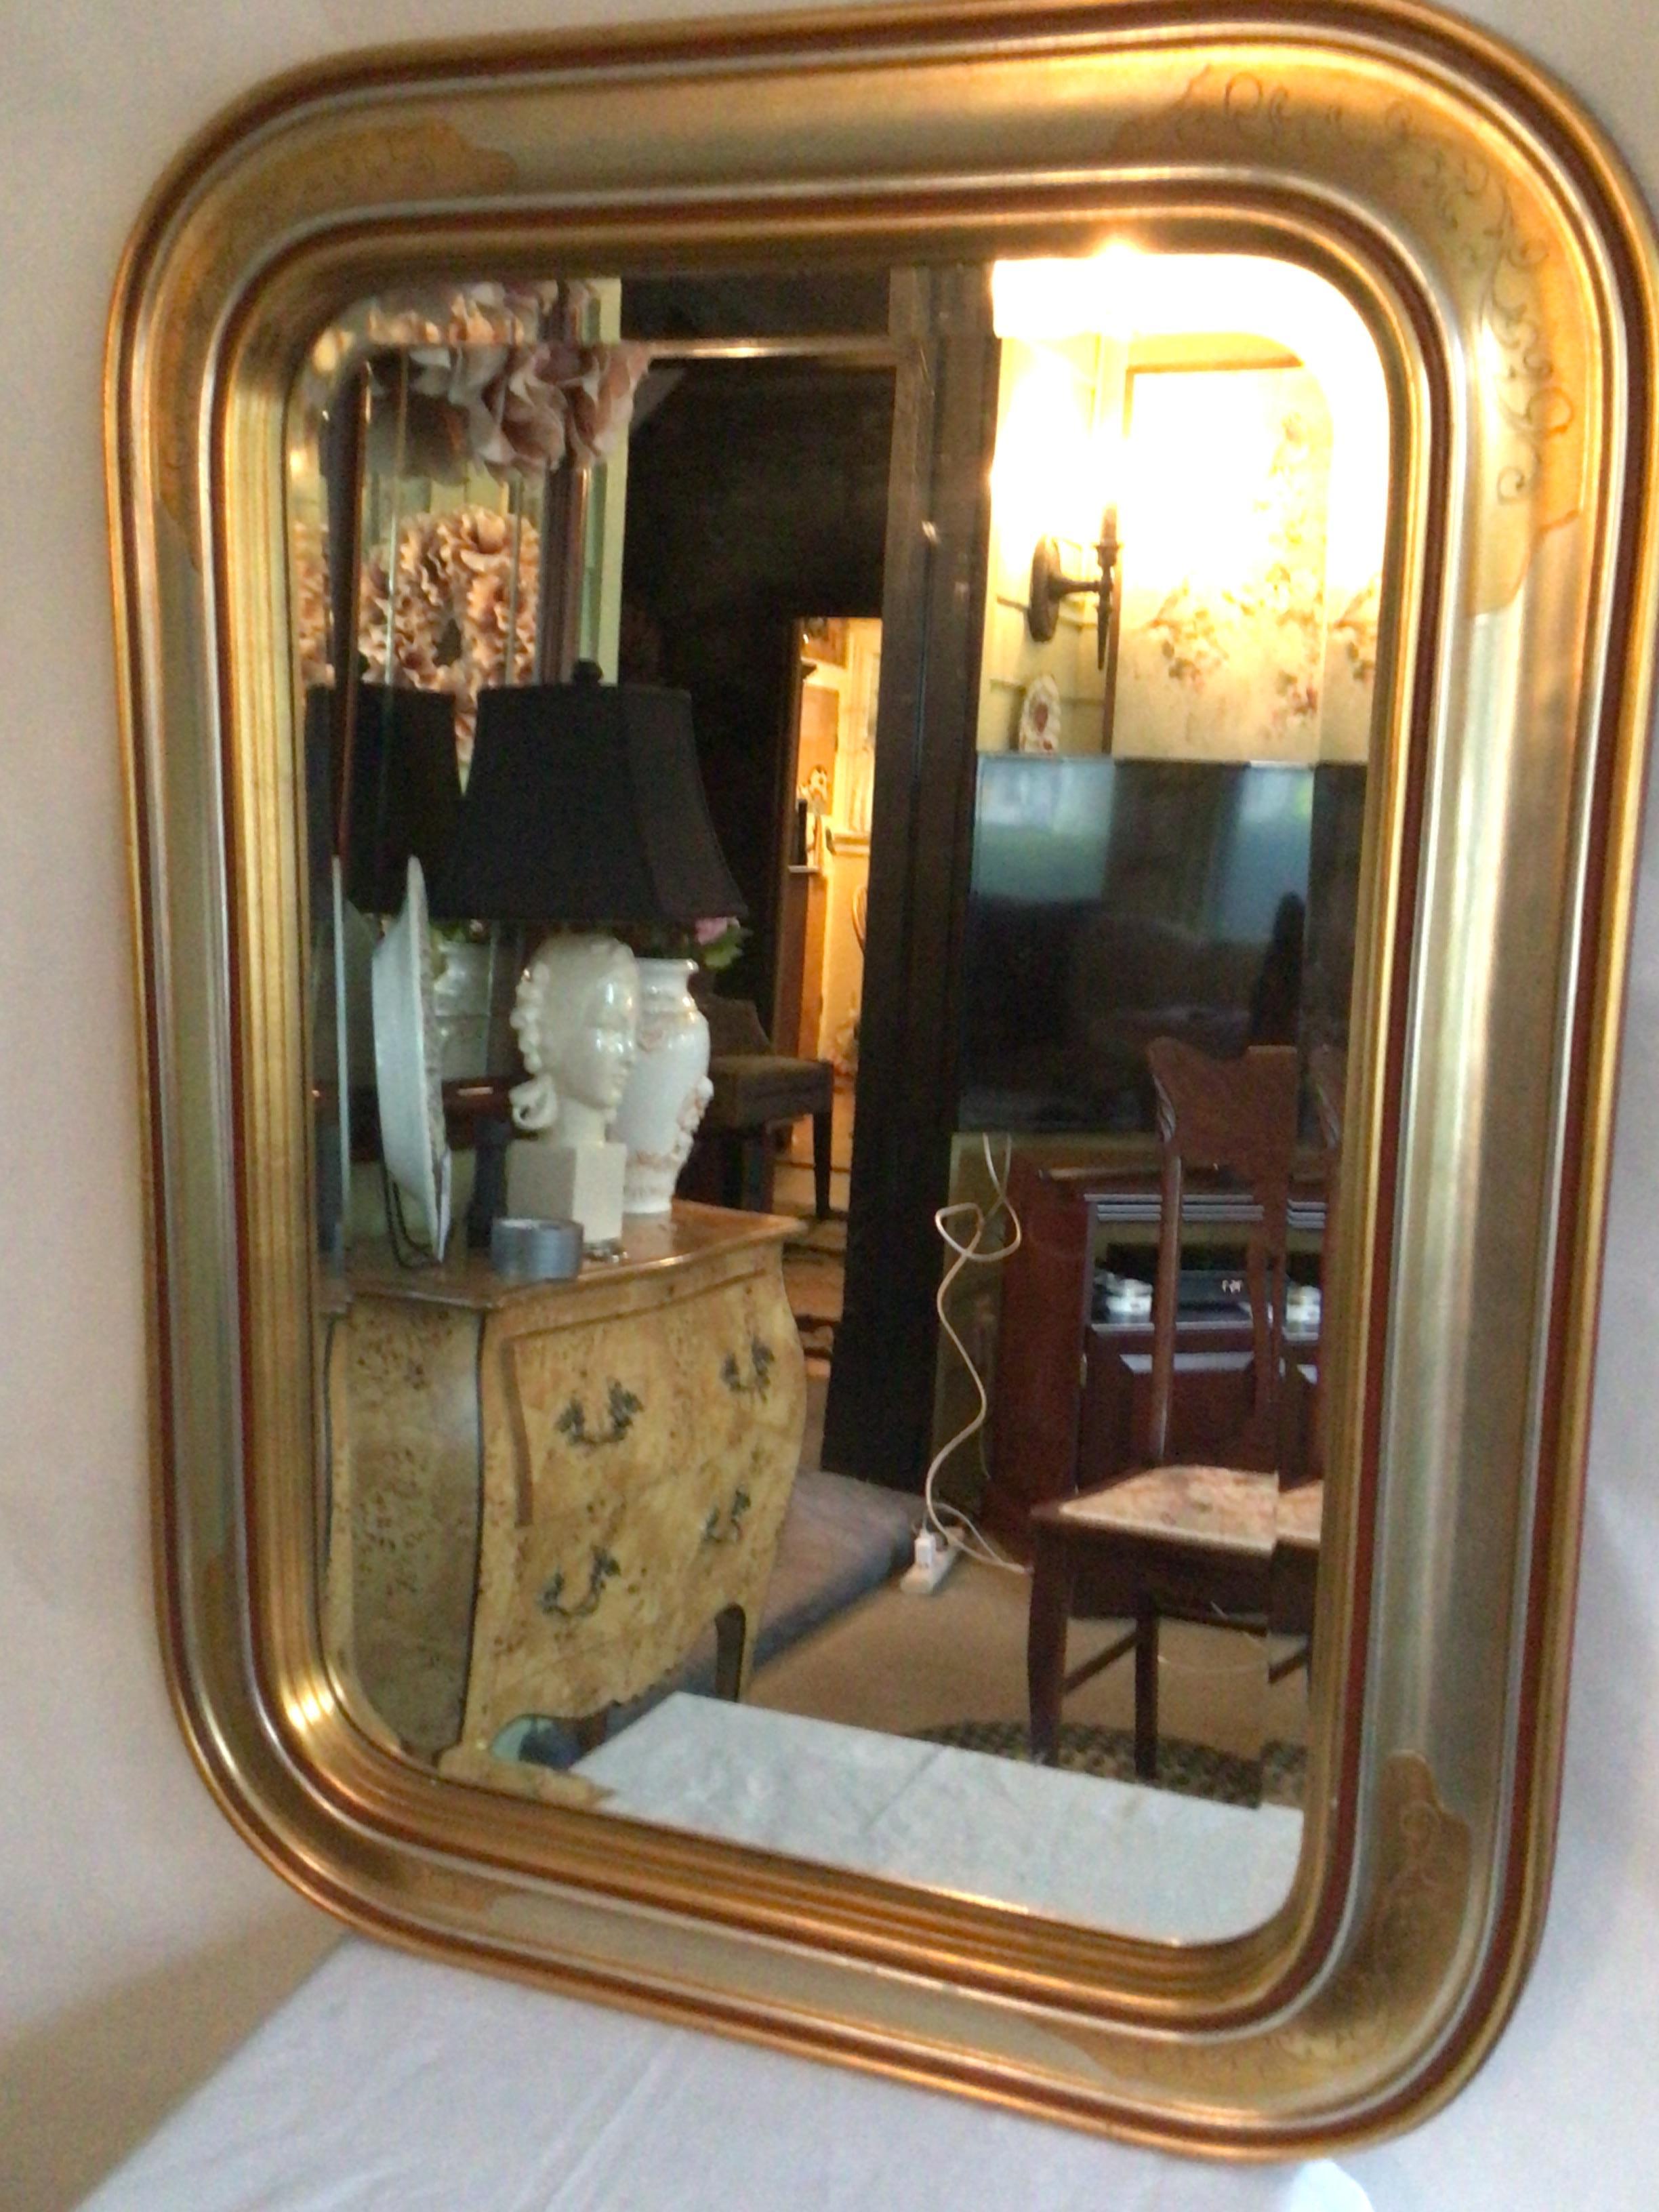 1970s Gilt and Silver Leaf Wood Wall Mirror With Beveled Glass
Wood base
Beveled glass mirror
Painted Scroll Detail at Rounded Corners
